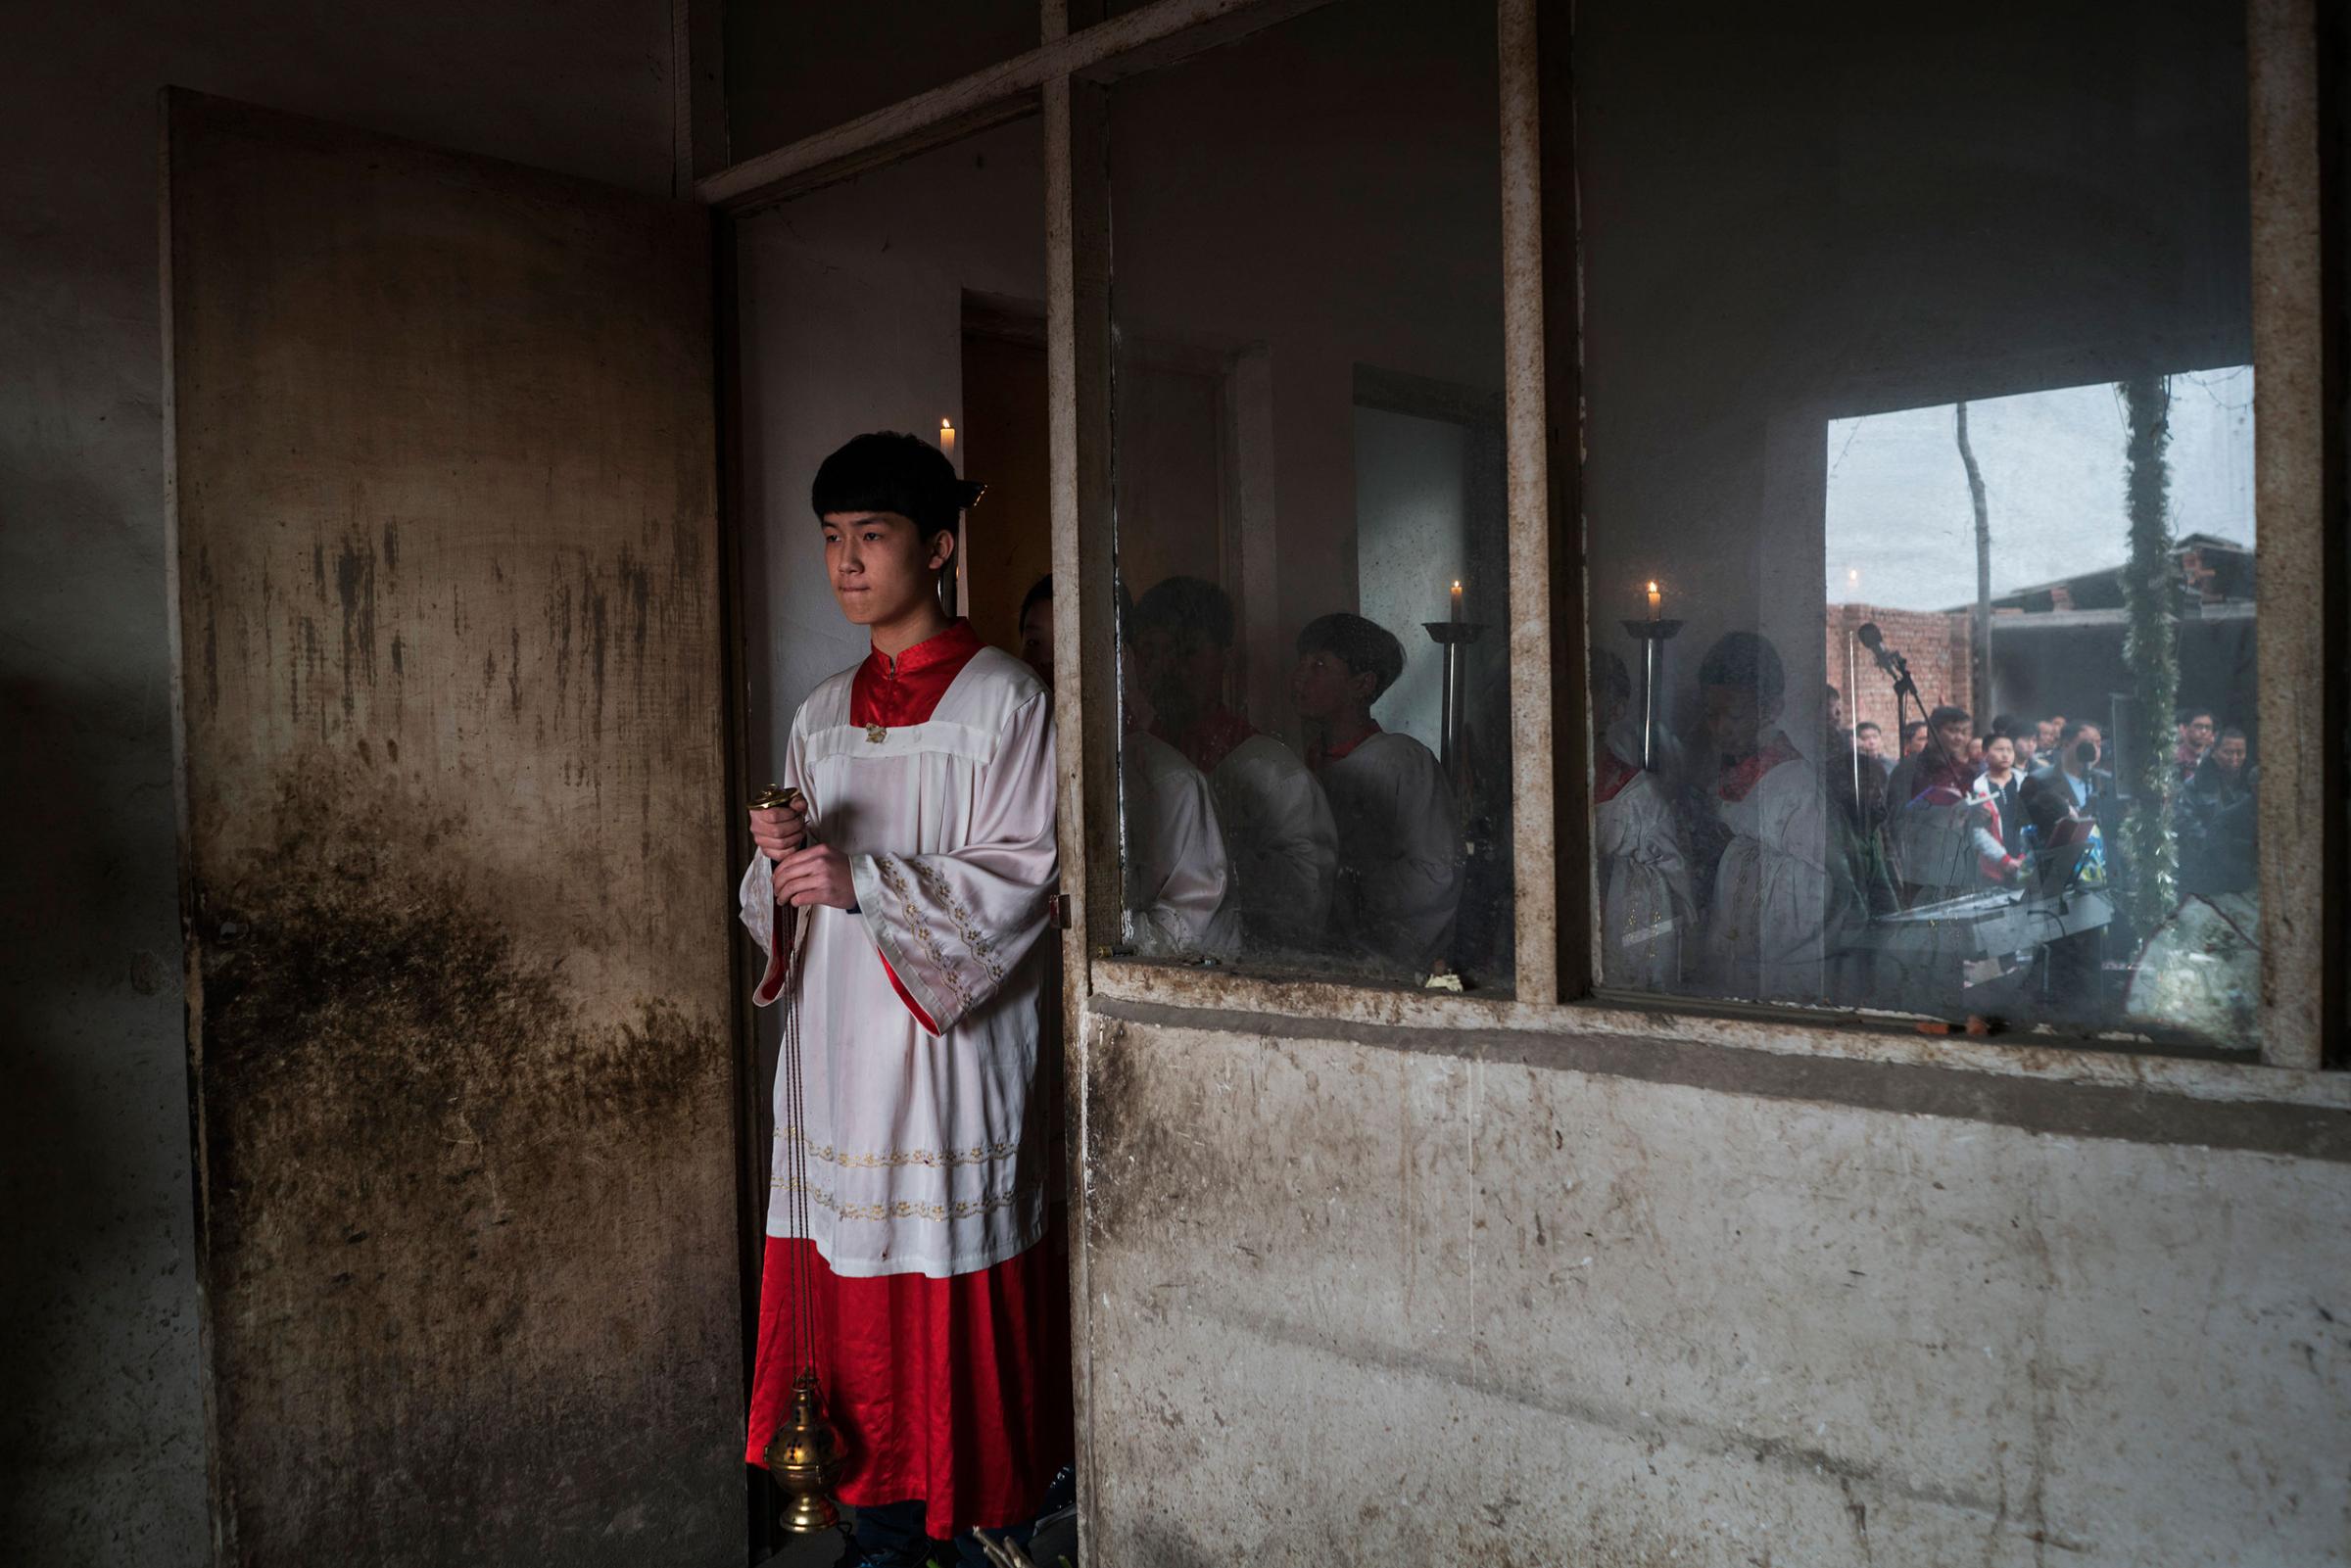 Altar boys prepare for an underground Palm Sunday service led by dissident Catholic Priest Dong Baolu in the yard of a house in Youtong village, Shijiazhuang, China, March 20, 2016.